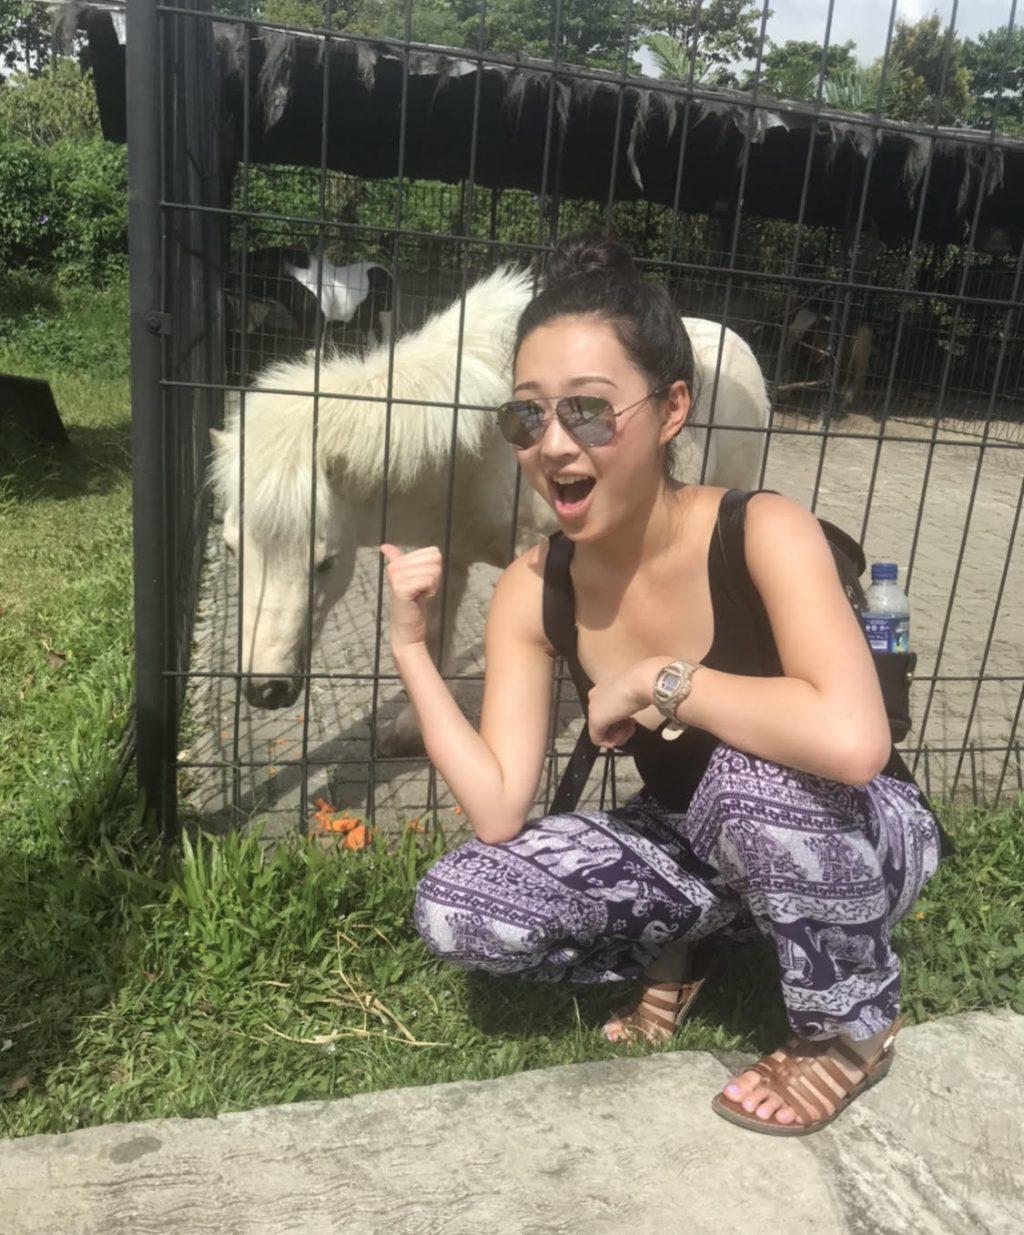 Chan poses with a miniature horse she found while hiking in the jungle in Indonesia in June 2018. Chan said she hopes to visit Asia again someday in the future.